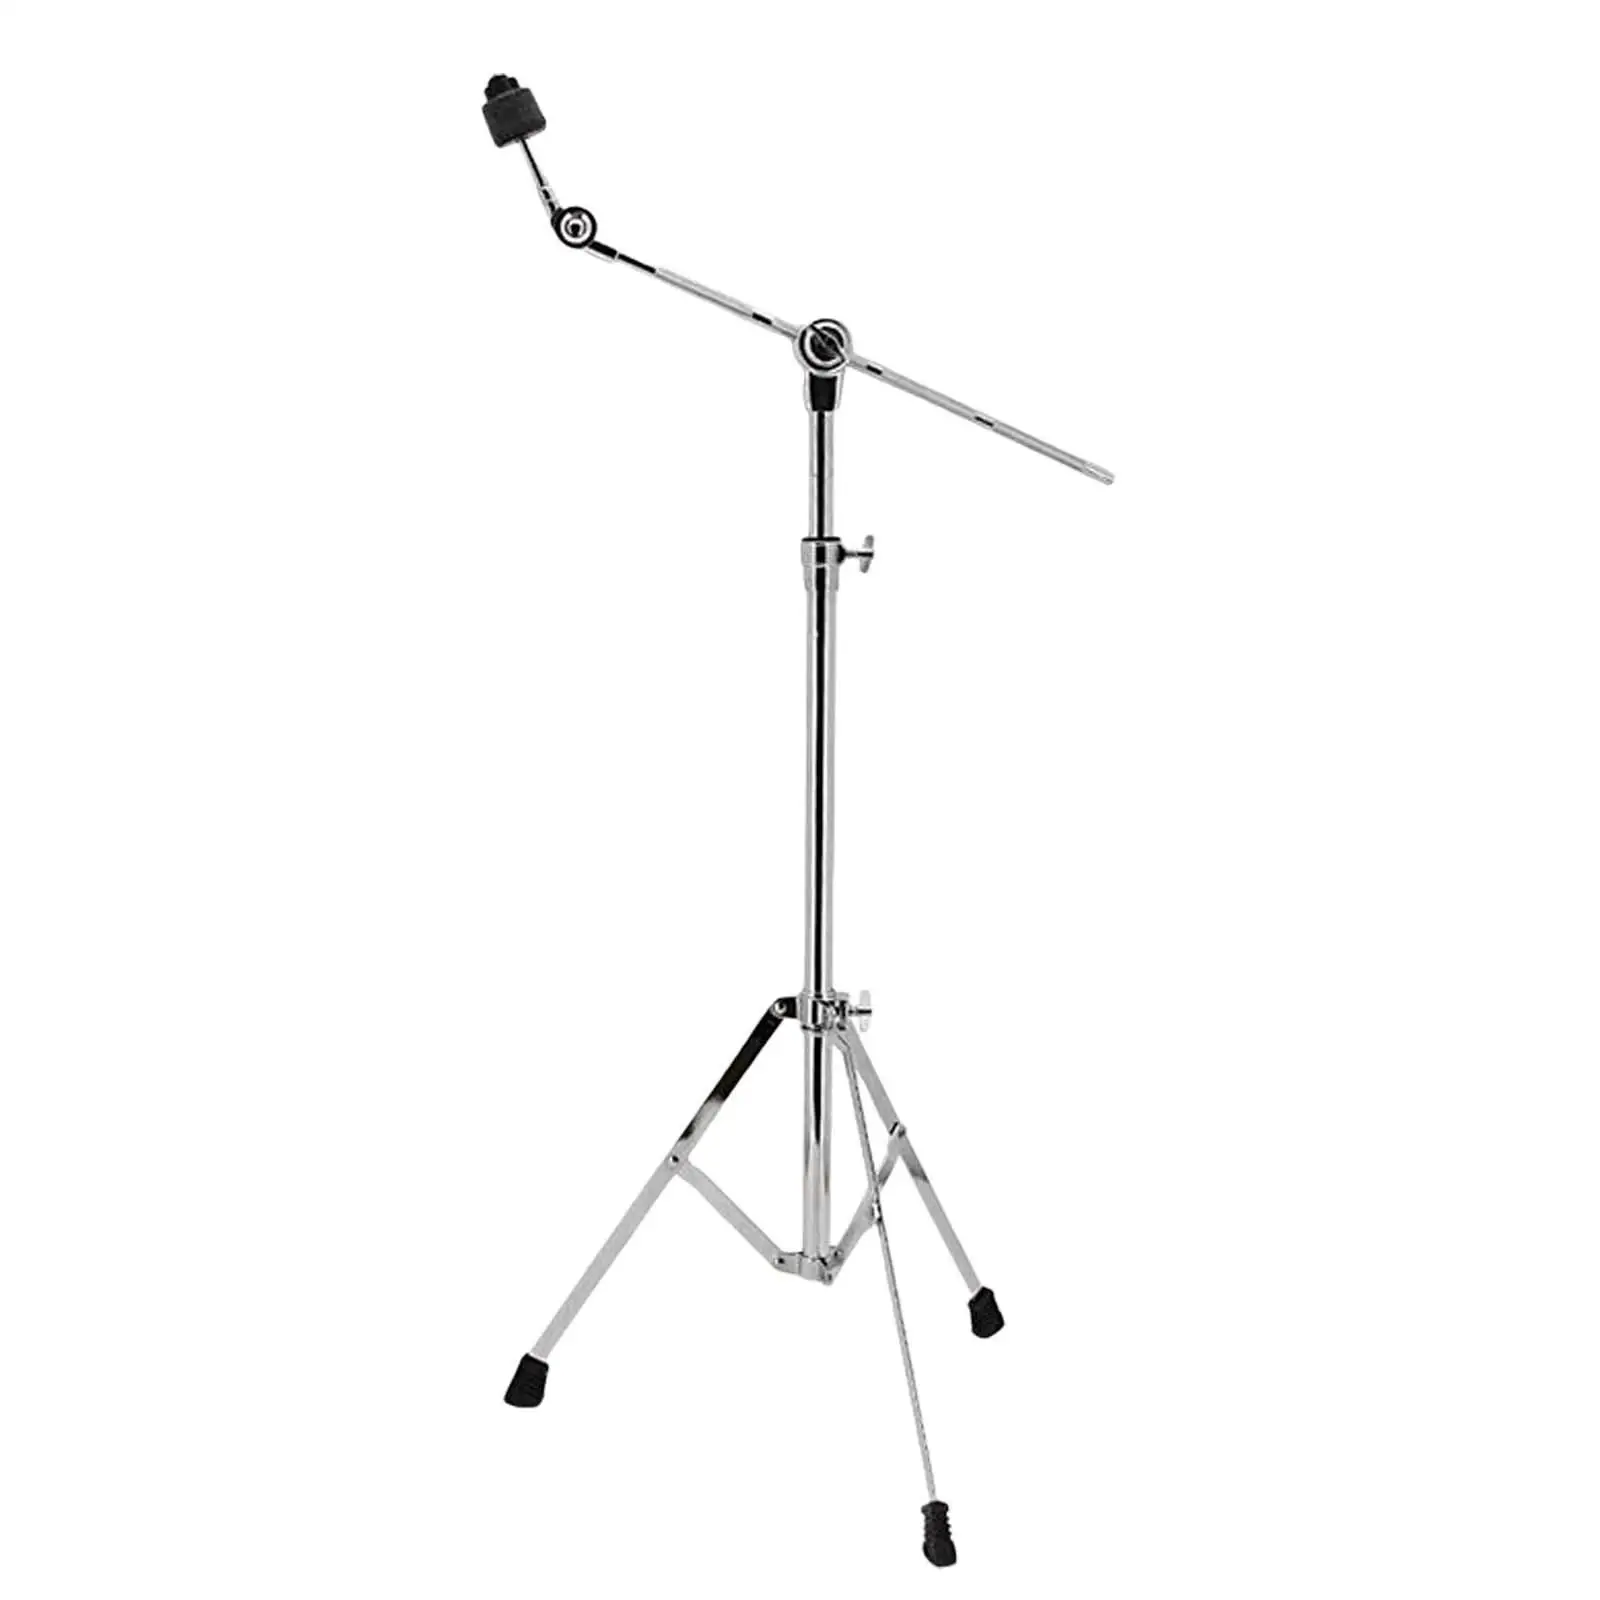 Adjustable Floor Drum Stand Holder Foldable Floor Triangle Bracket Percussion Accessories Dual Purpose Stand for General Playing